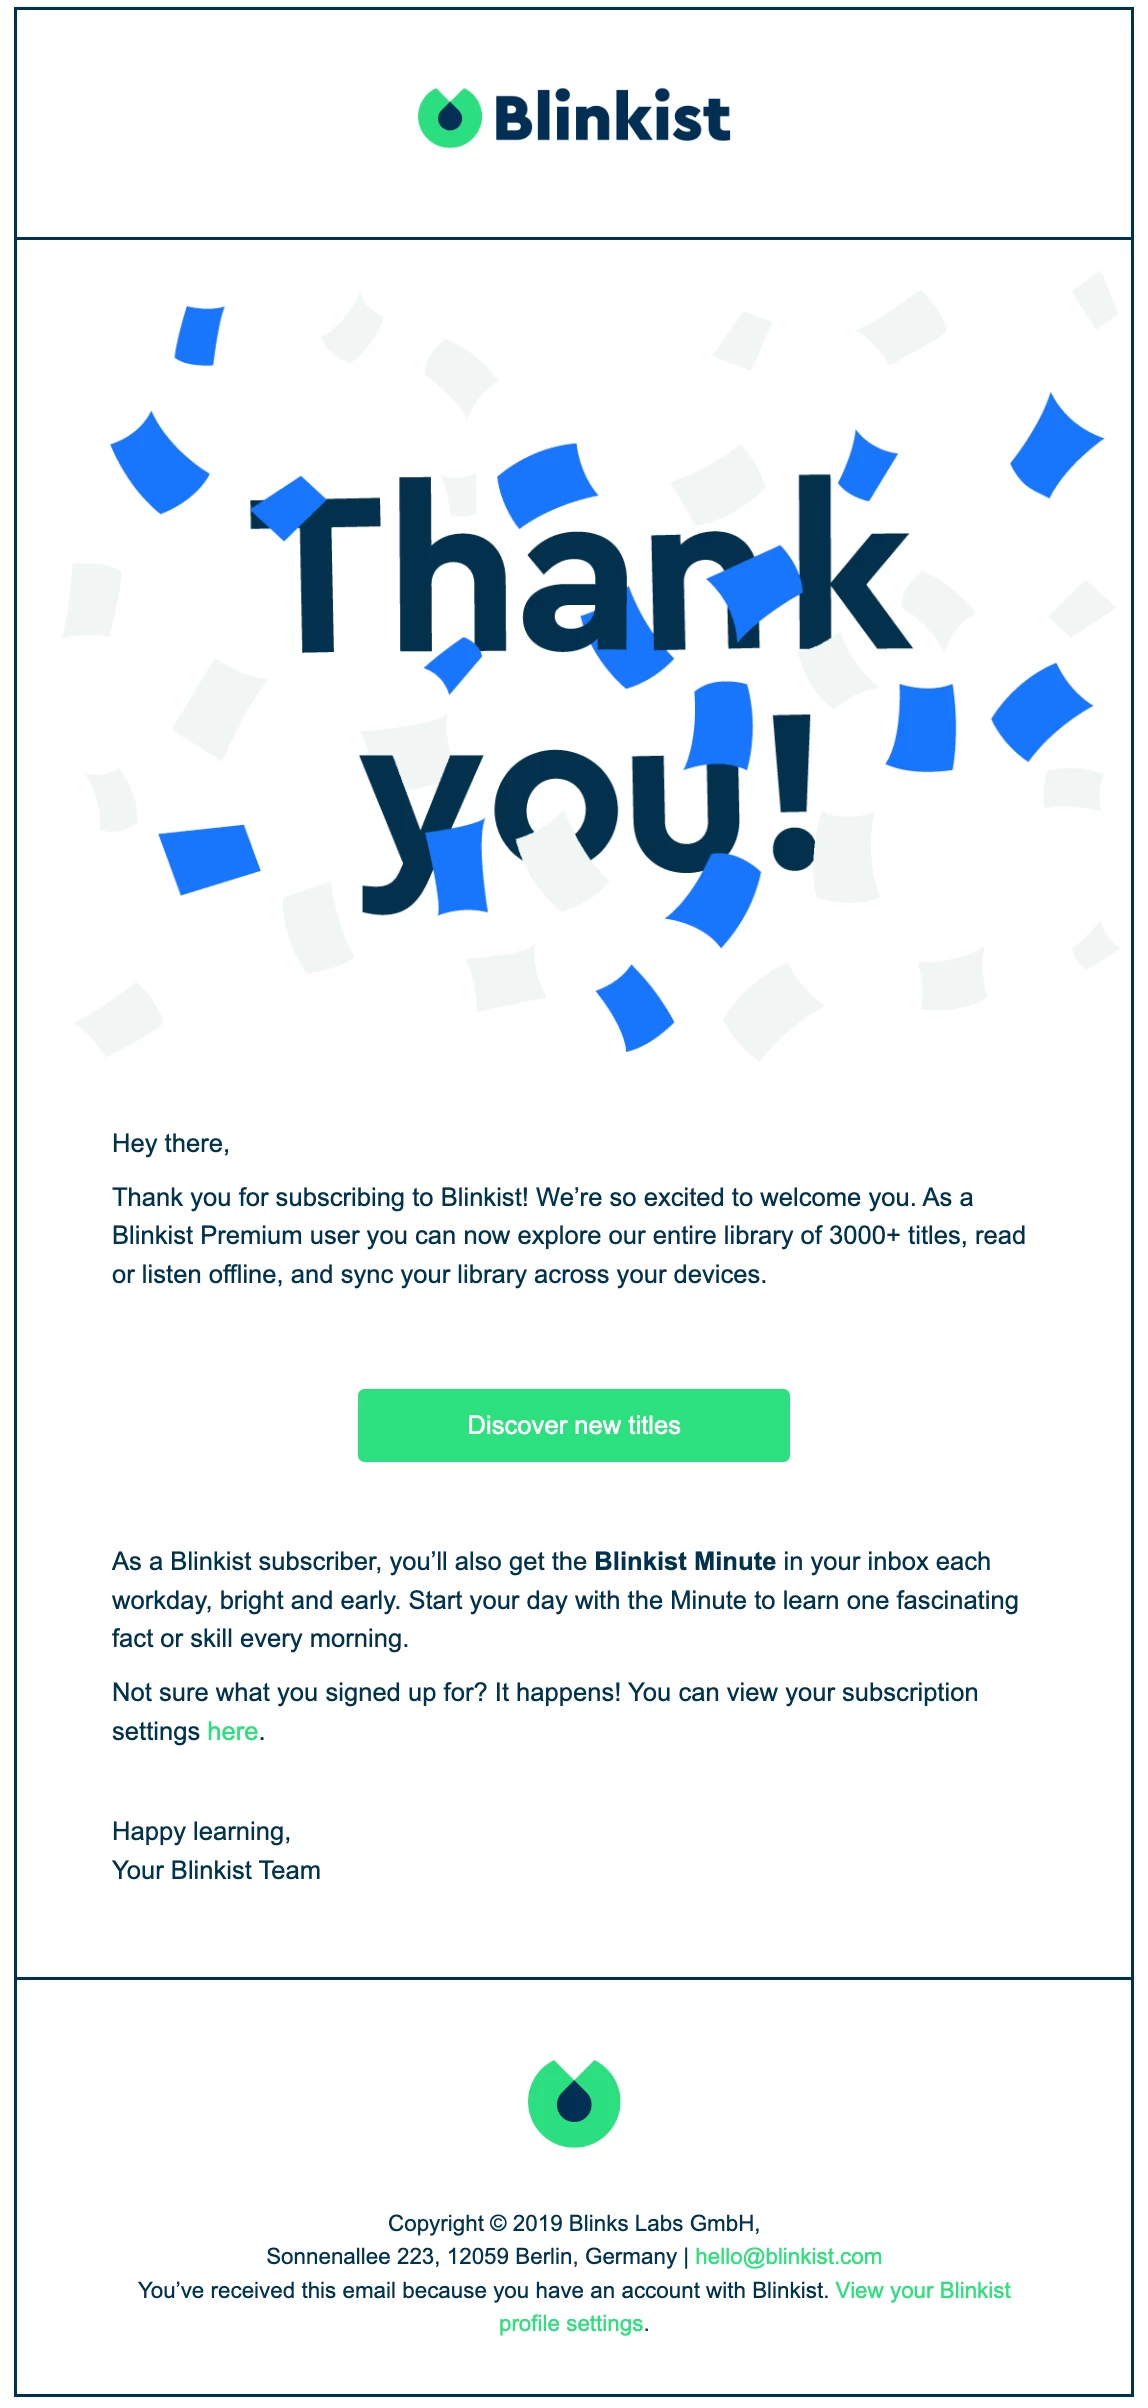 Short welcome email from Blinkist with a big graphic that says 